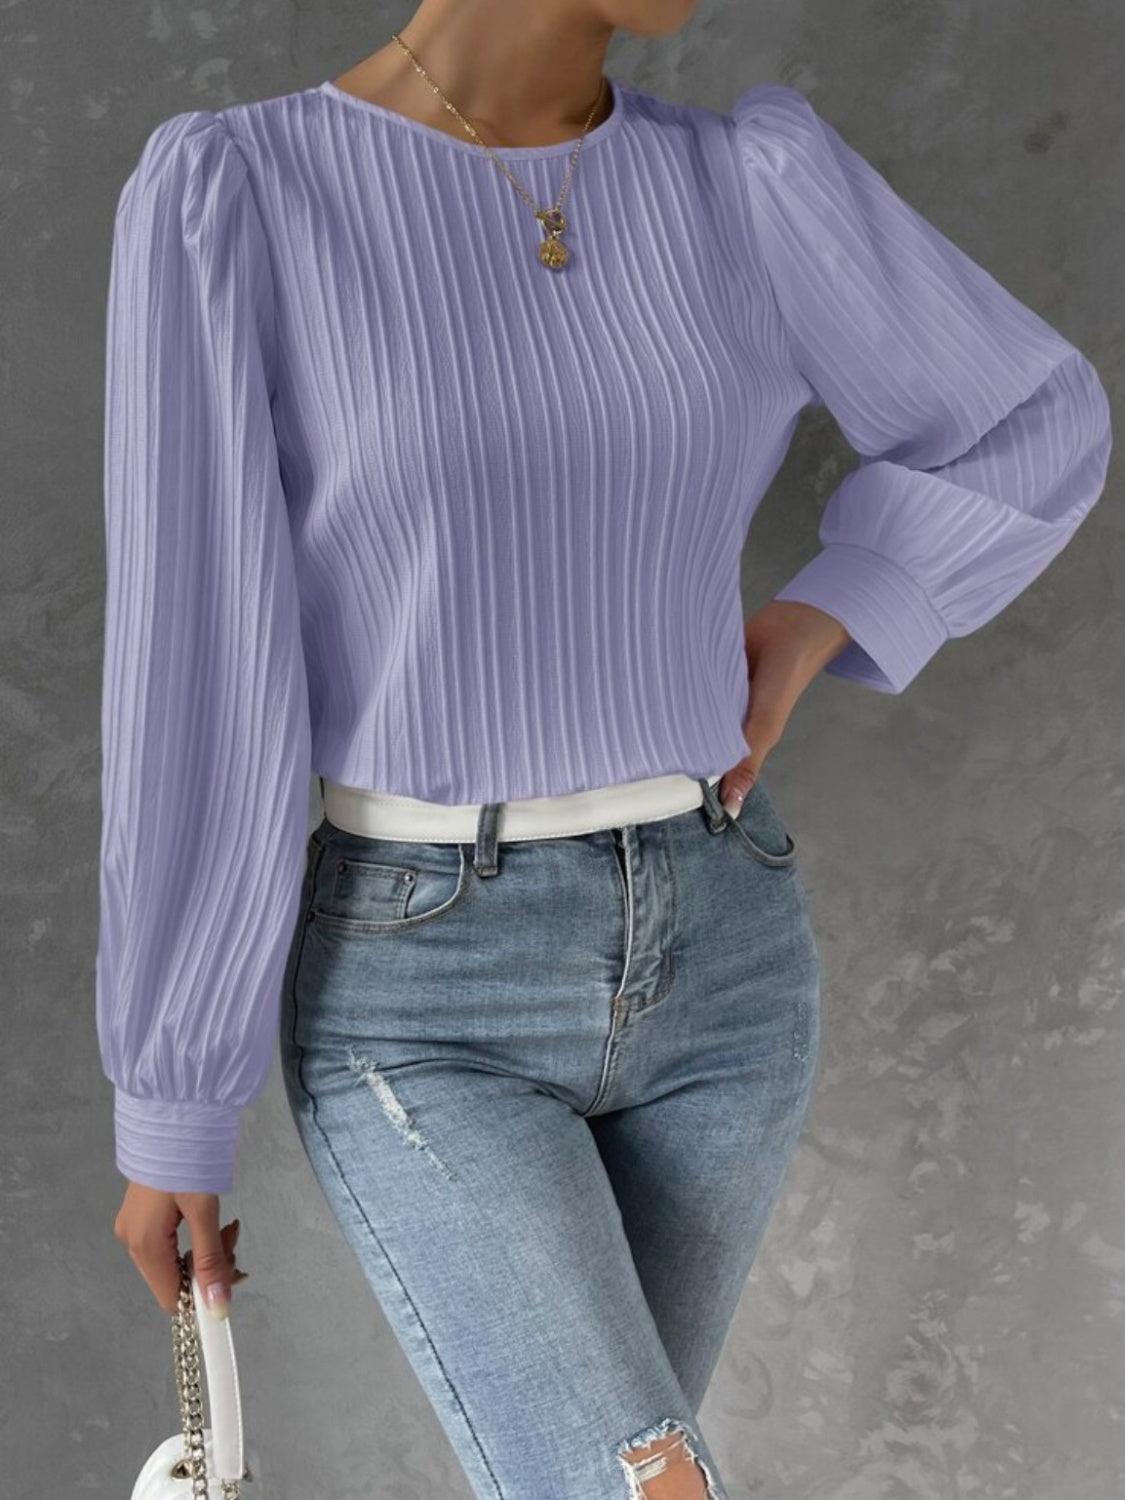 a woman wearing a purple top and ripped jeans